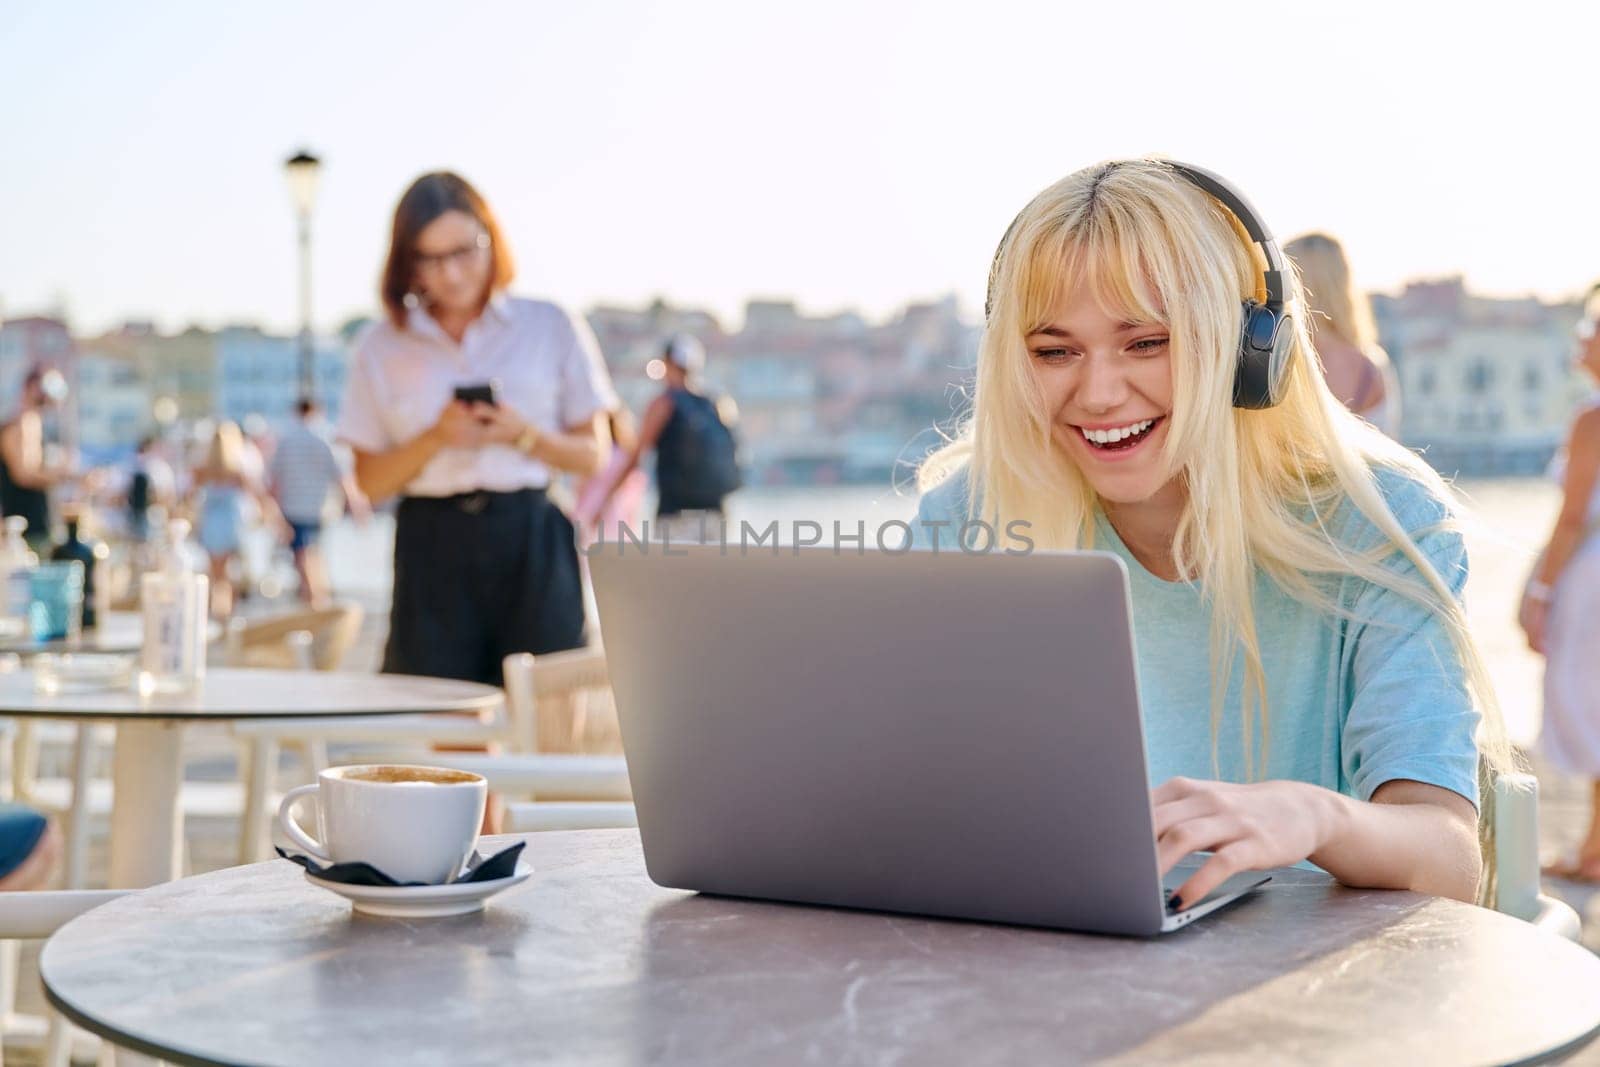 Smiling beautiful teenage girl in headphones looking into laptop. Blonde female in an outdoor cafe on waterfront using laptop. Youth, technology, lifestyle concept